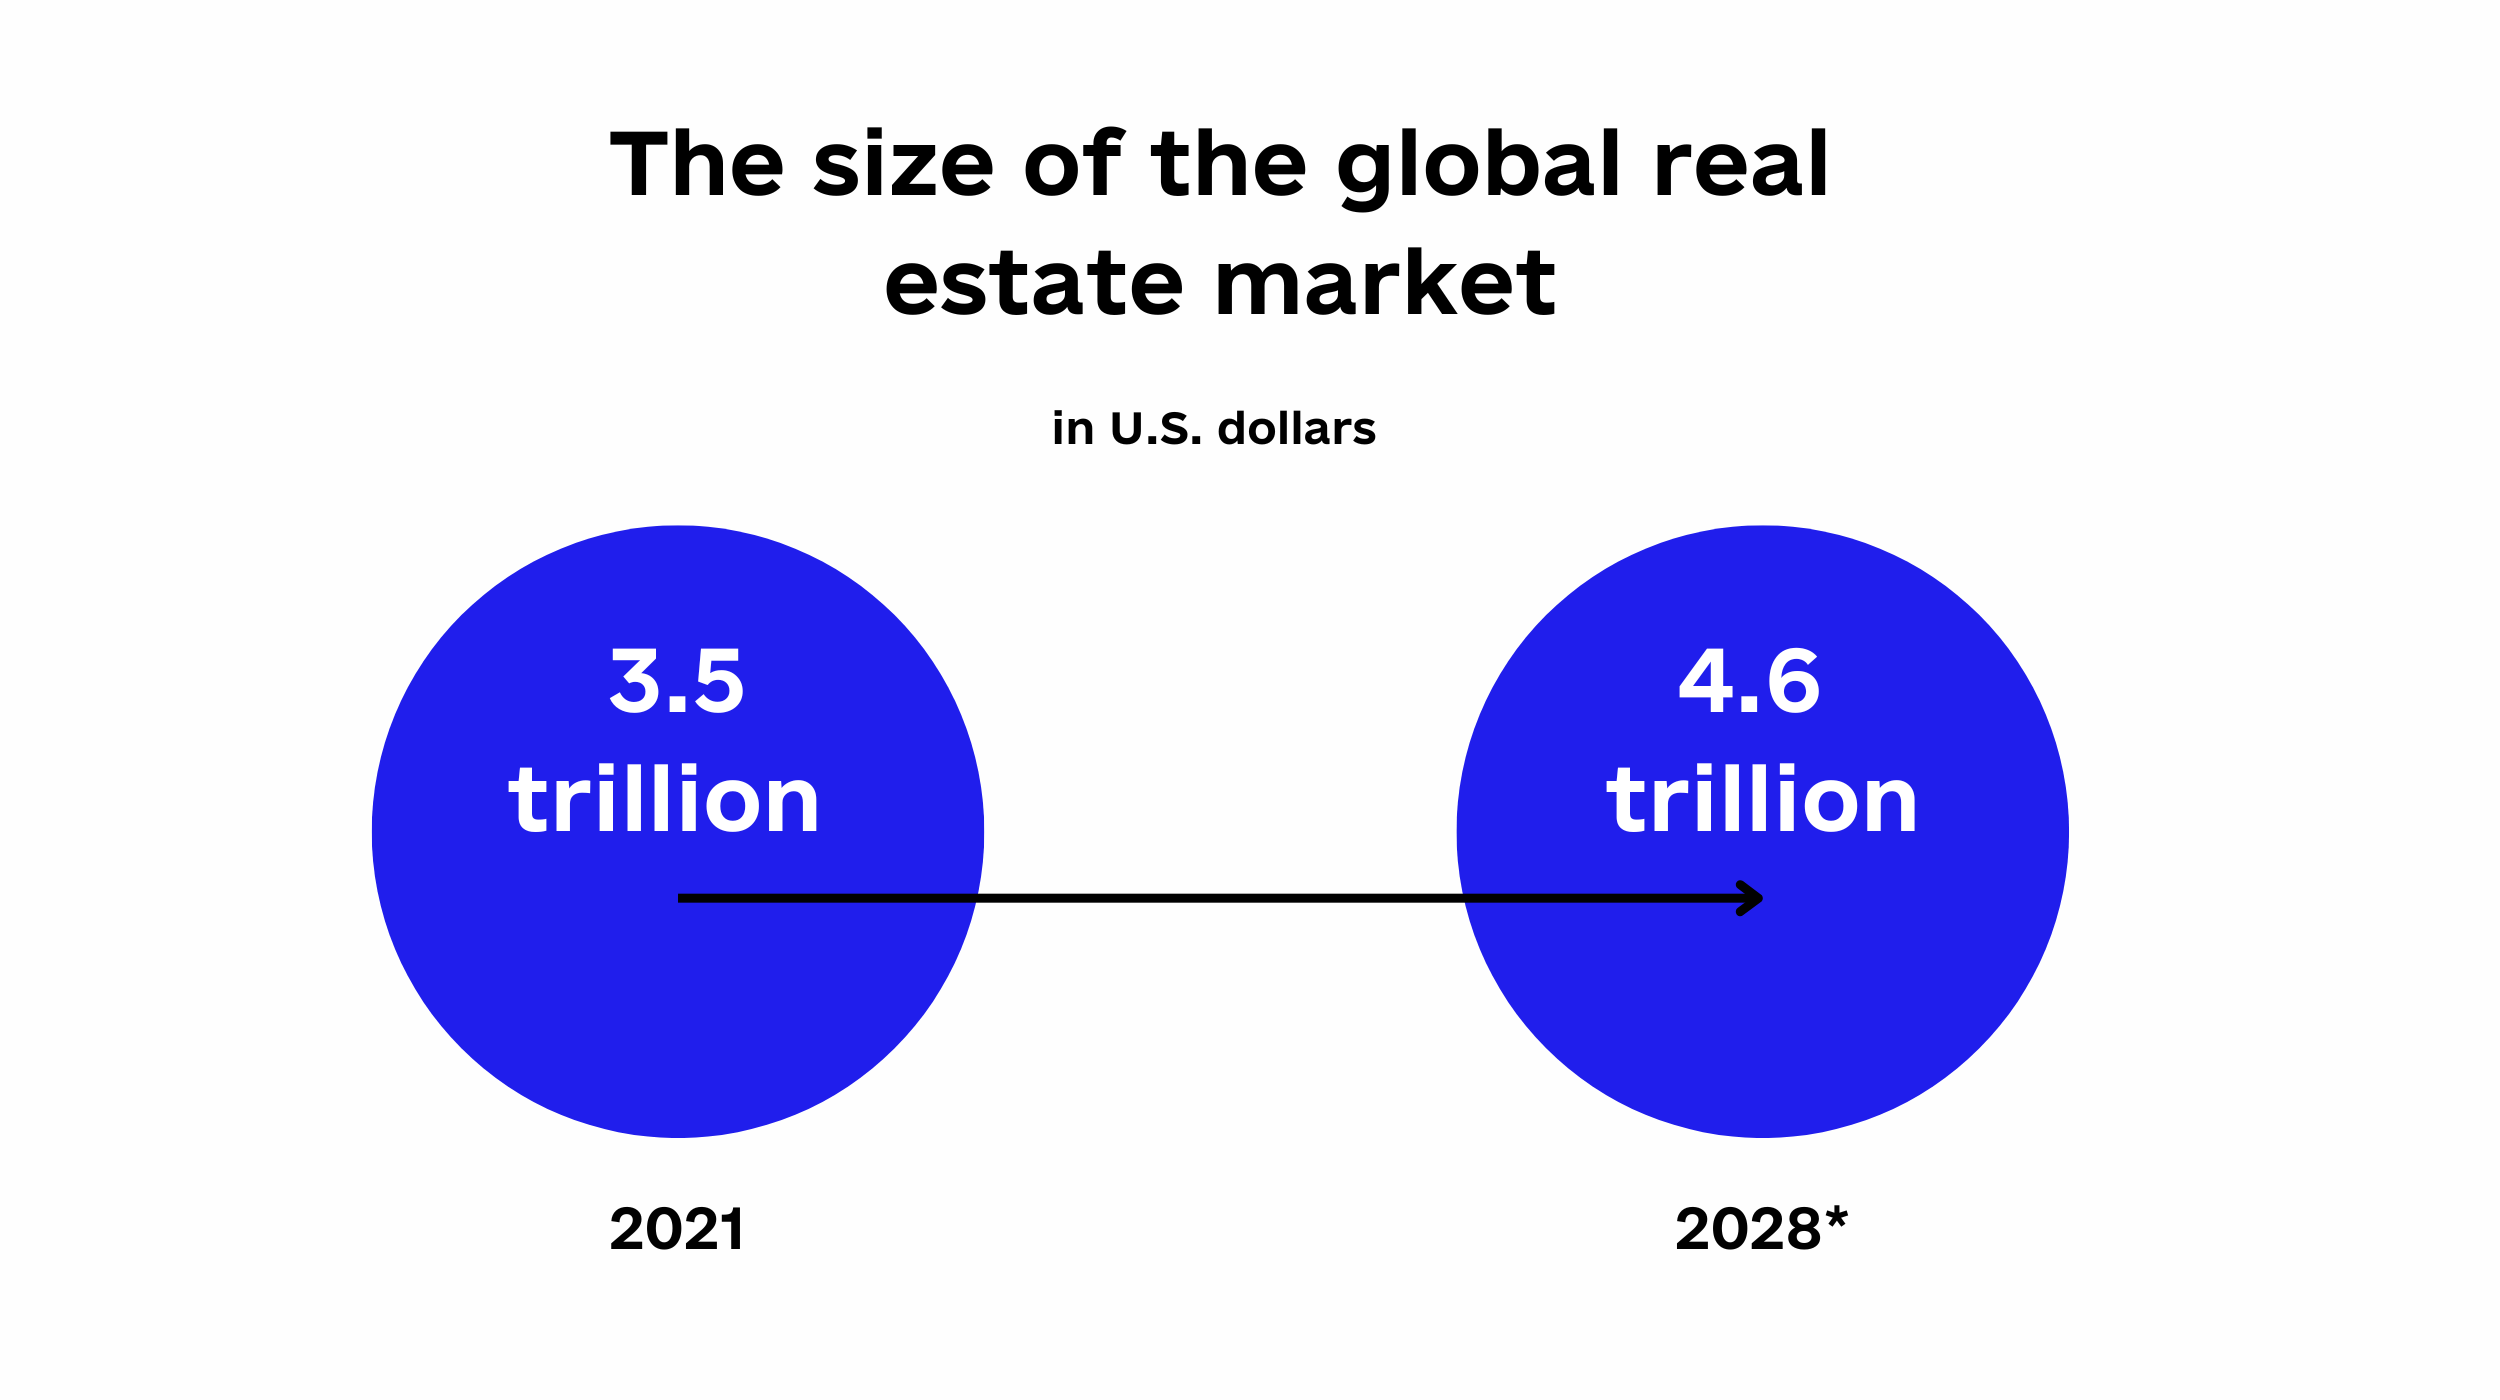 The size of the global real estate market